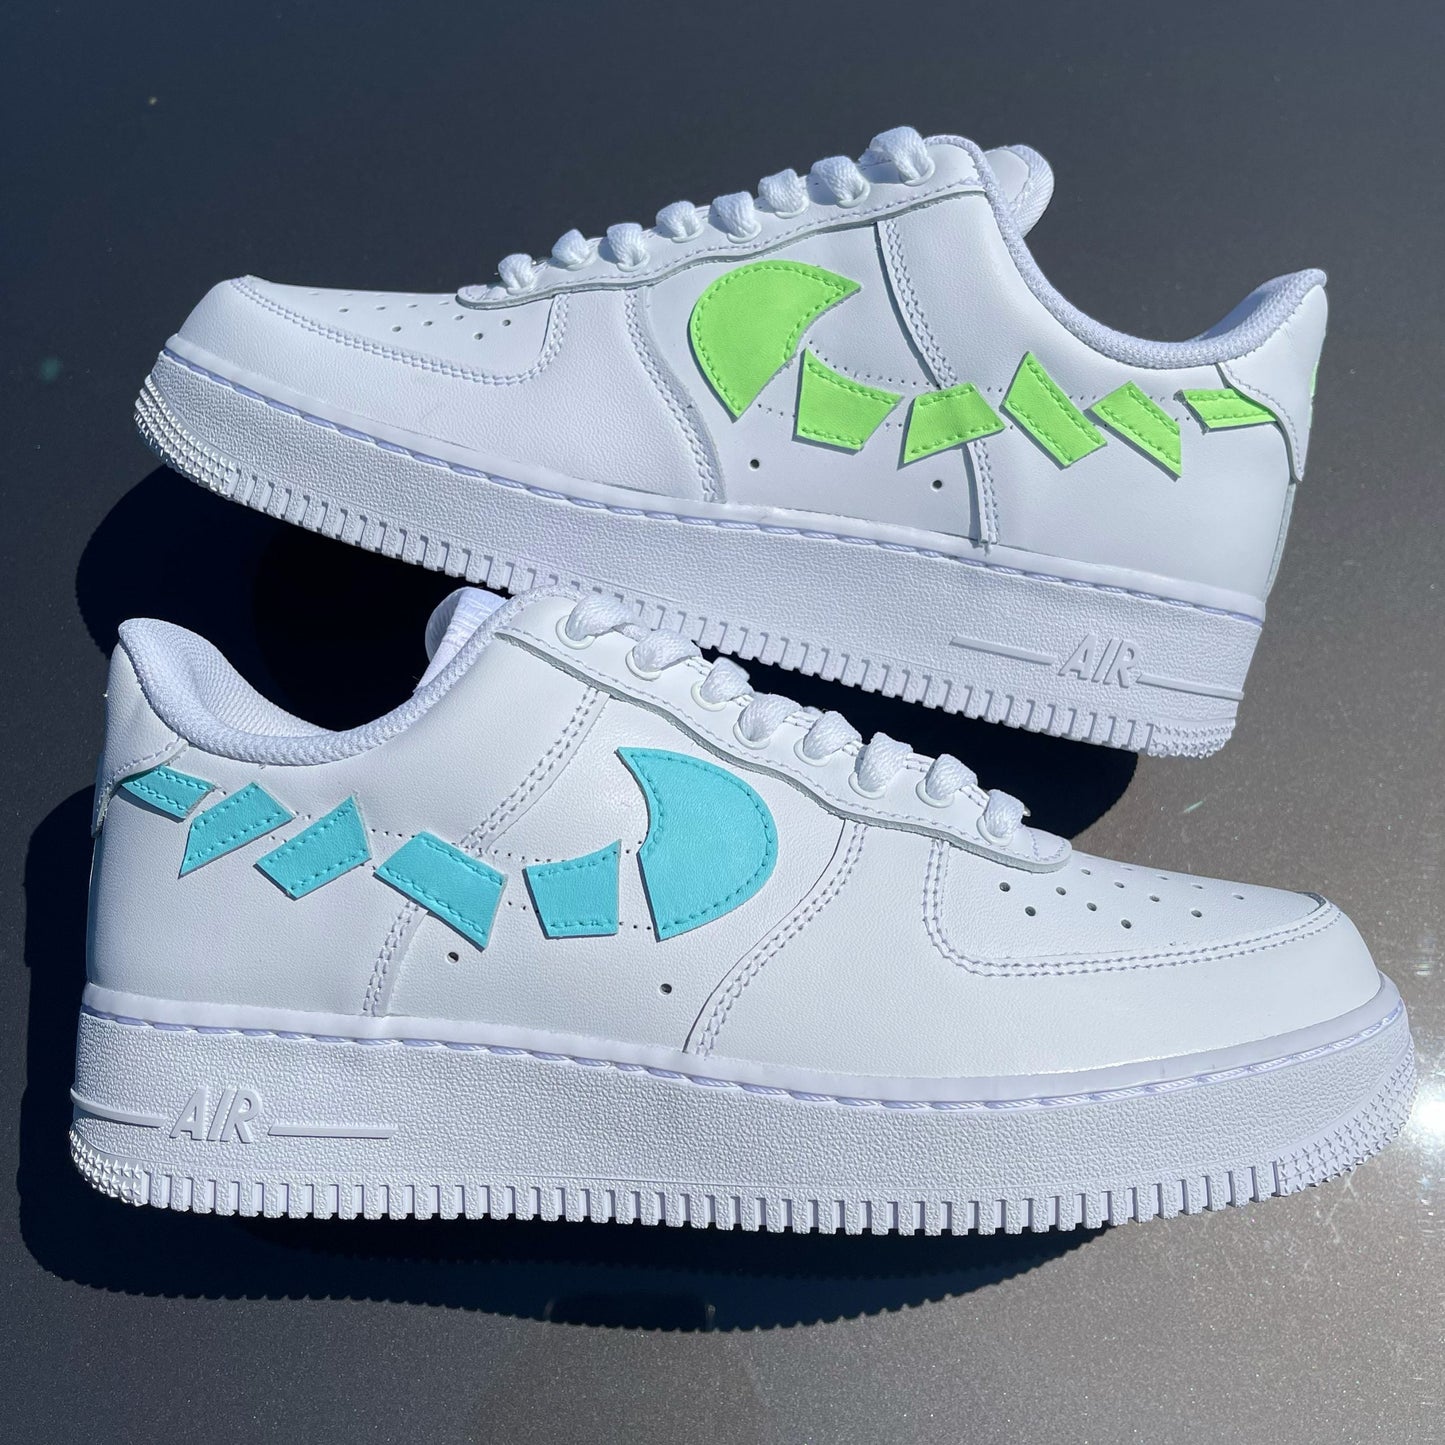 Custom AIR FORCE 1  - Destroyed swooshes (green/blue)